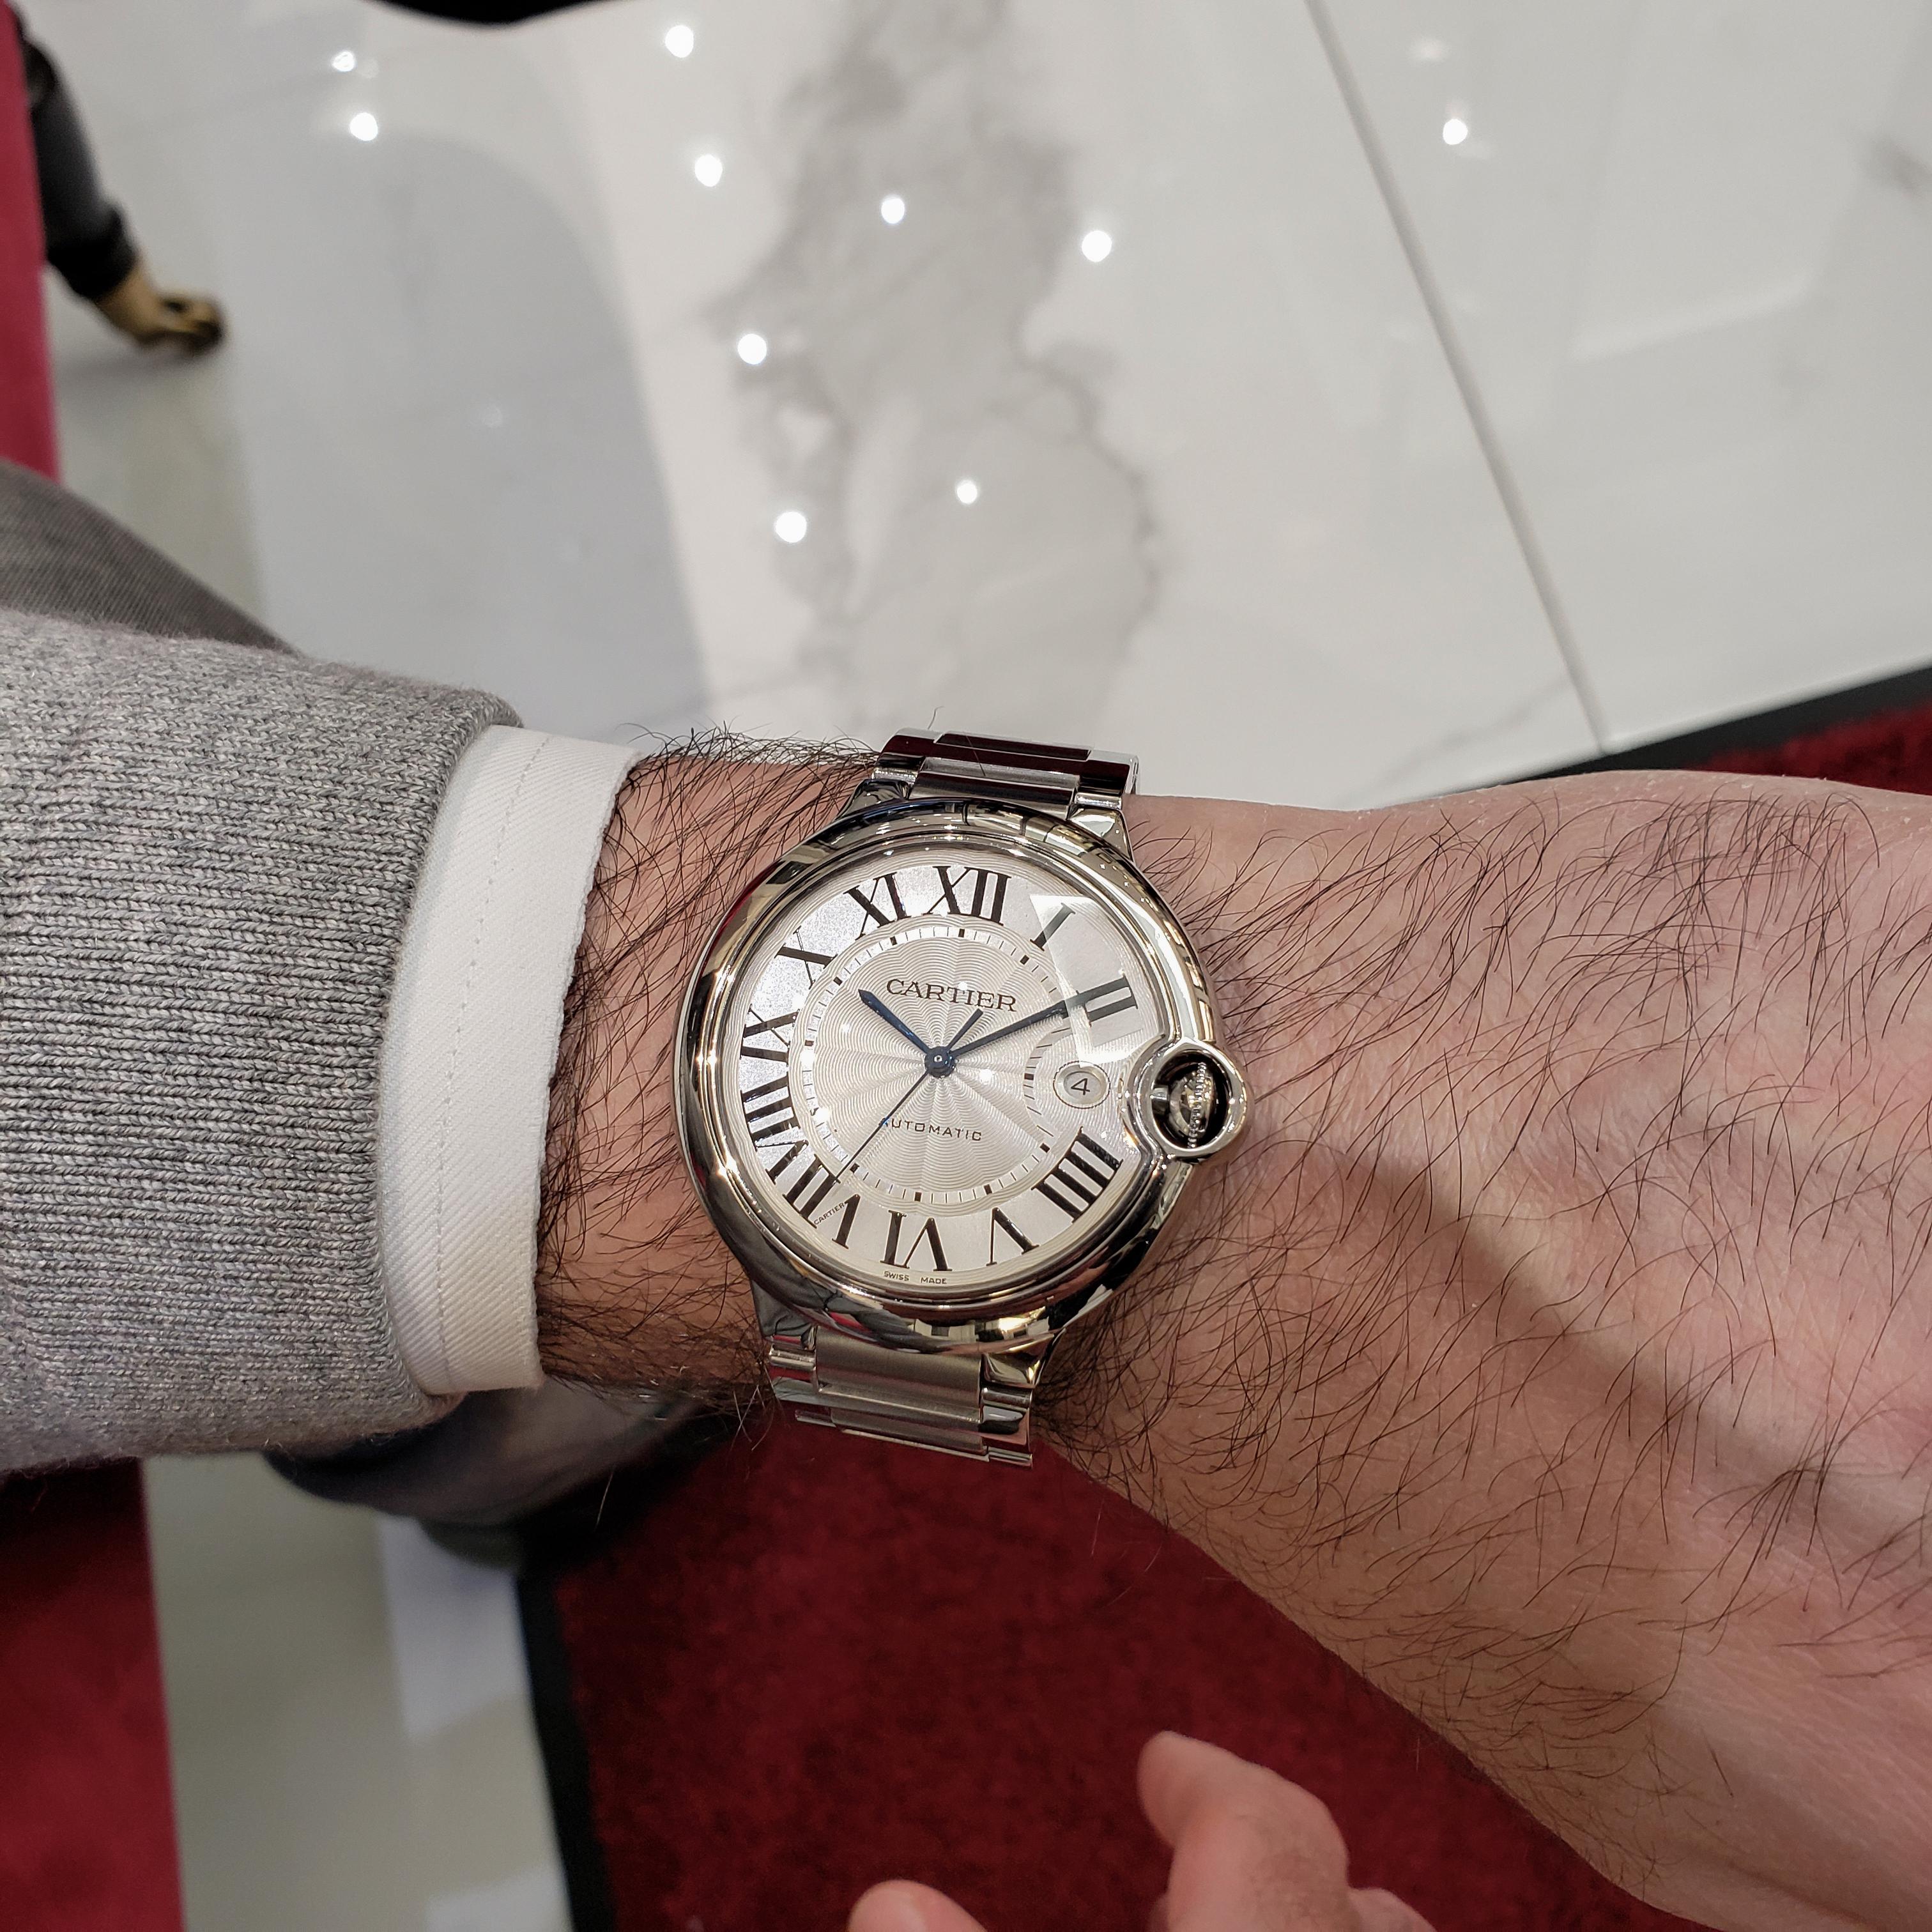 Made and Signed Cartier wristwatch. Model Ballon Bleu W69012Z4. Features a 42mm stainless steel case, and stainless steel bracelet with deployant clasp. Dial features roman numeral hour markers with a date in the 3 o'clock position. Minute markers